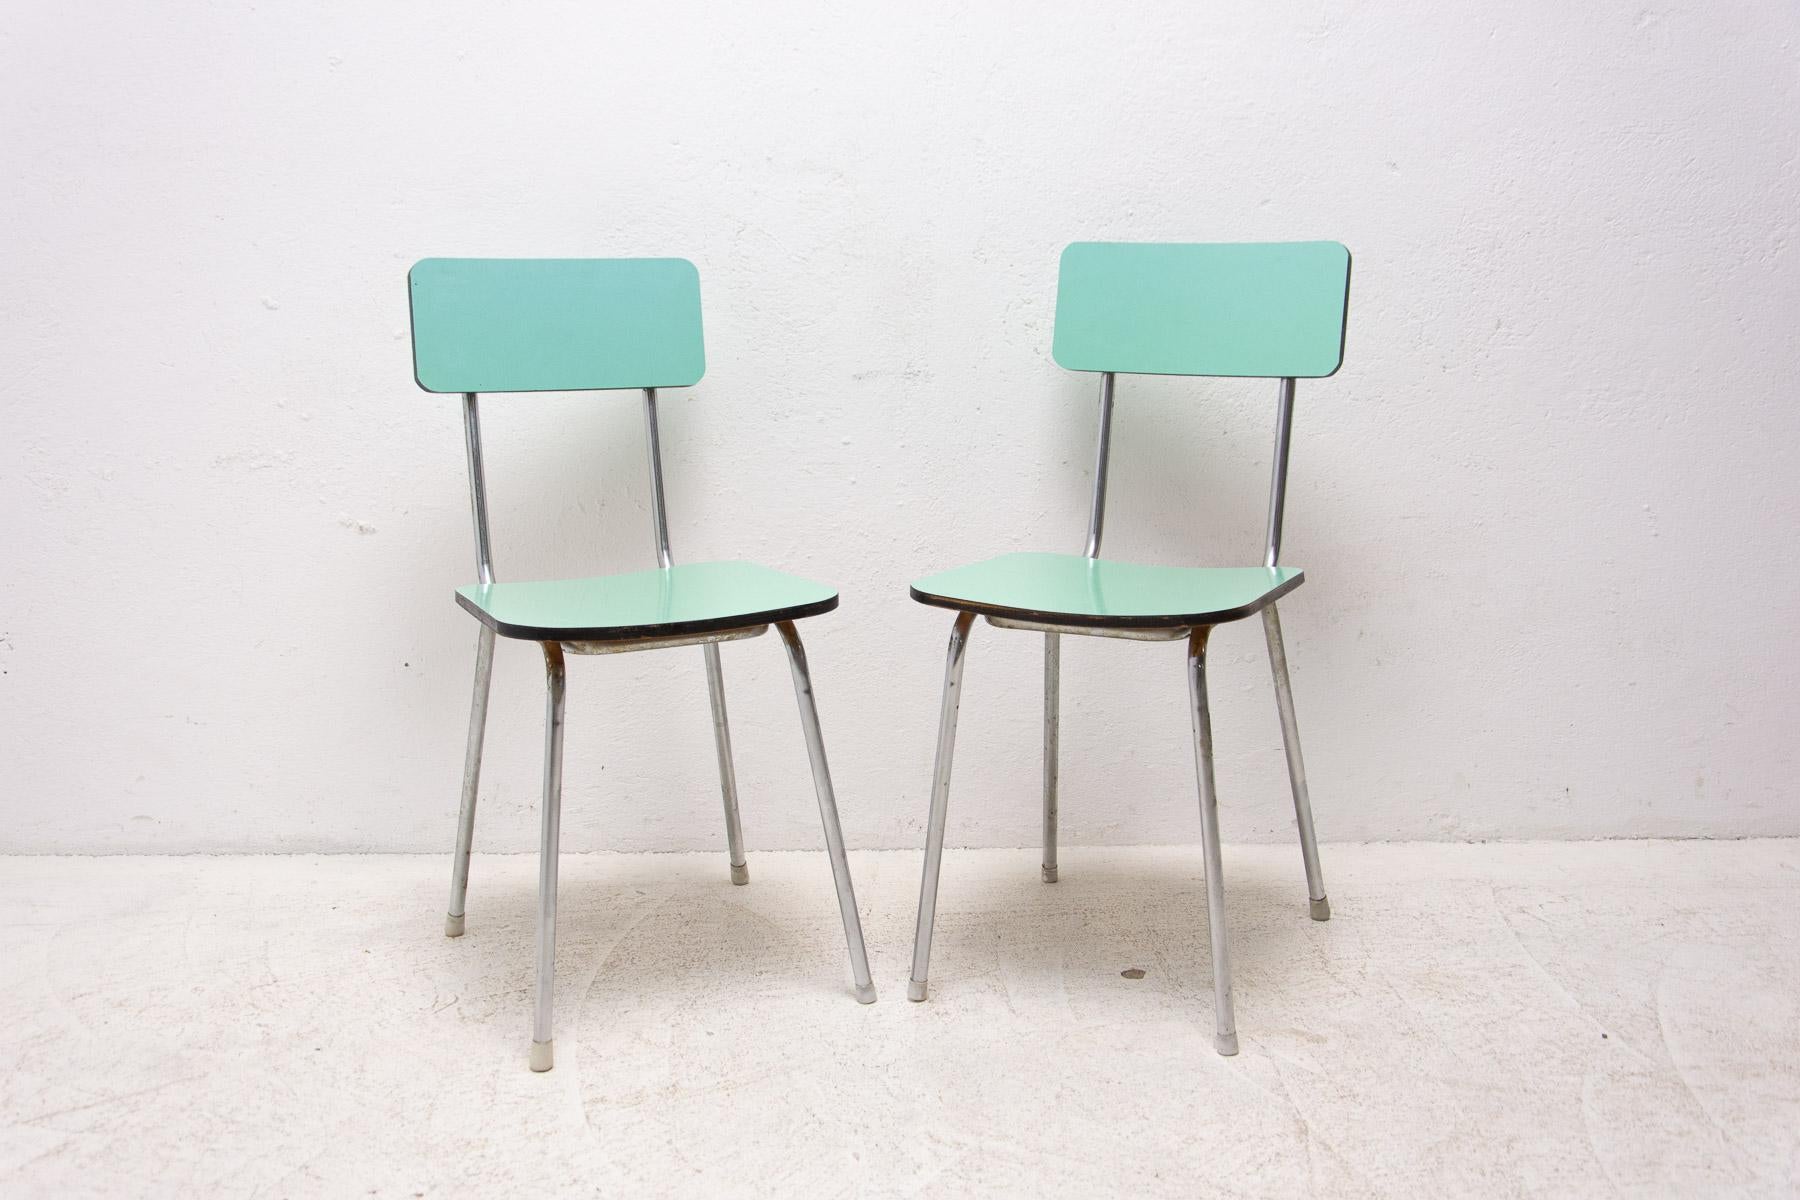 Mid-century color formica cafe or dining chairs with chrome legs. Made in the 1960’s. In very good Vintage condition. Price is for the pair.

Measures: Height: 80 cm

Width: 35 cm

Depth: 43 cm

Seat height: 45 cm.